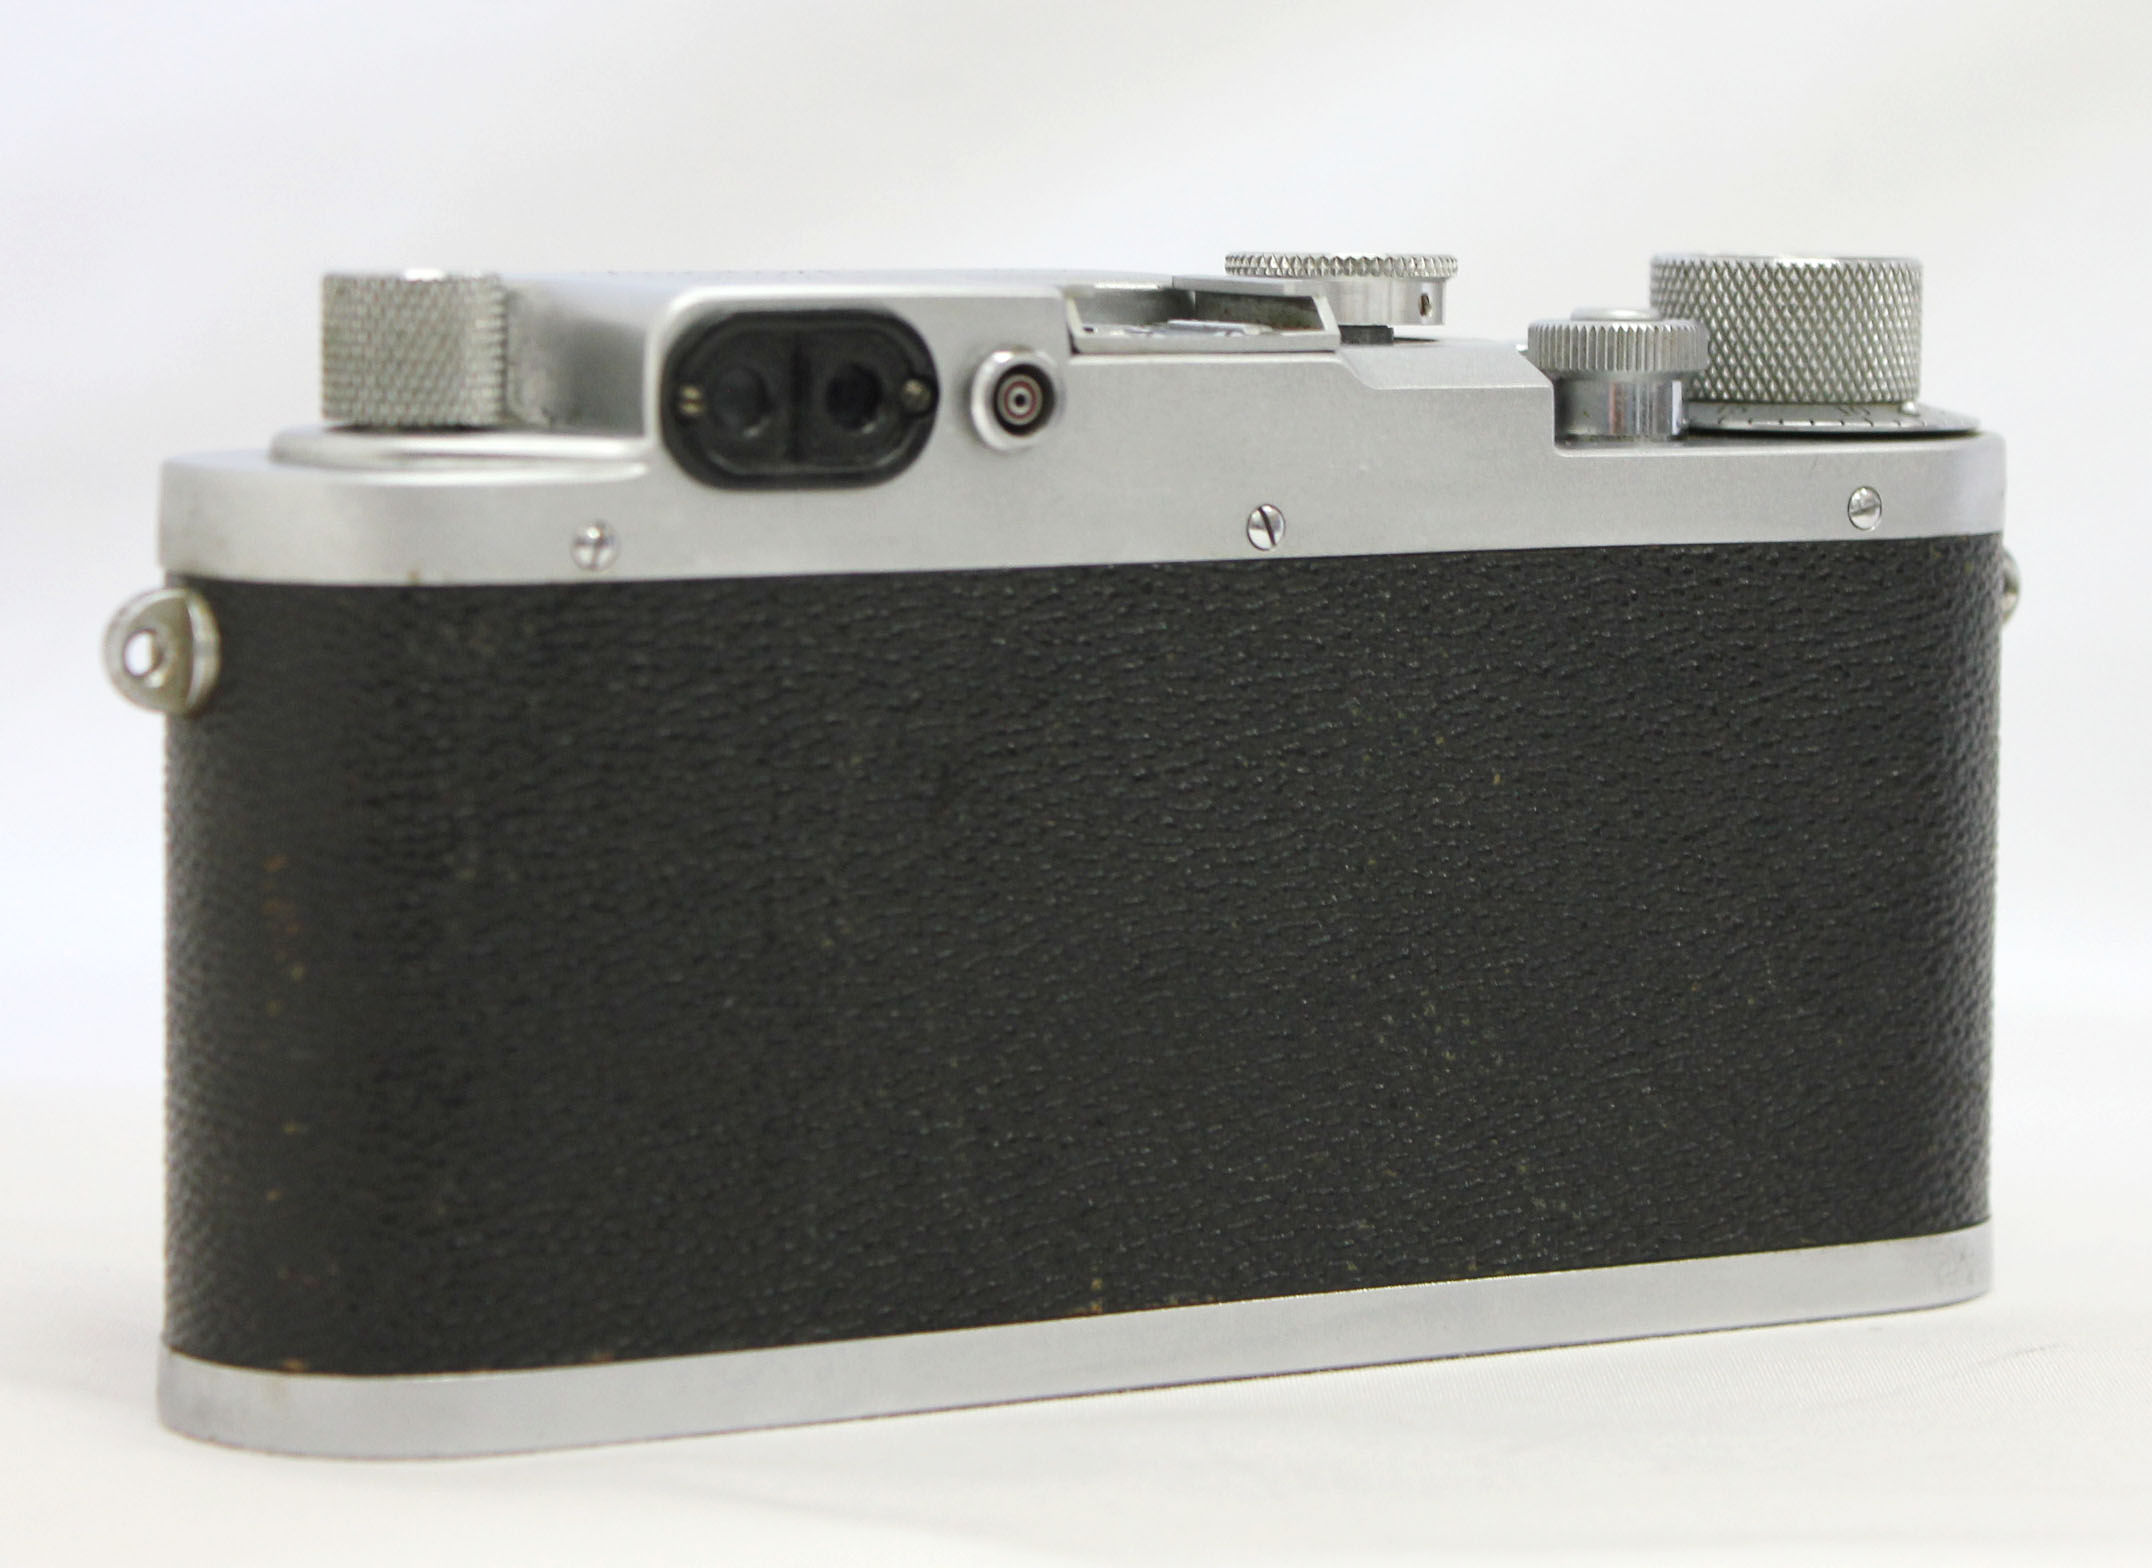 Leotax F Leica Screw Mount LTM M39 Rangefinder Camera with 50mm F/3.5 Lens from Japan Photo 6